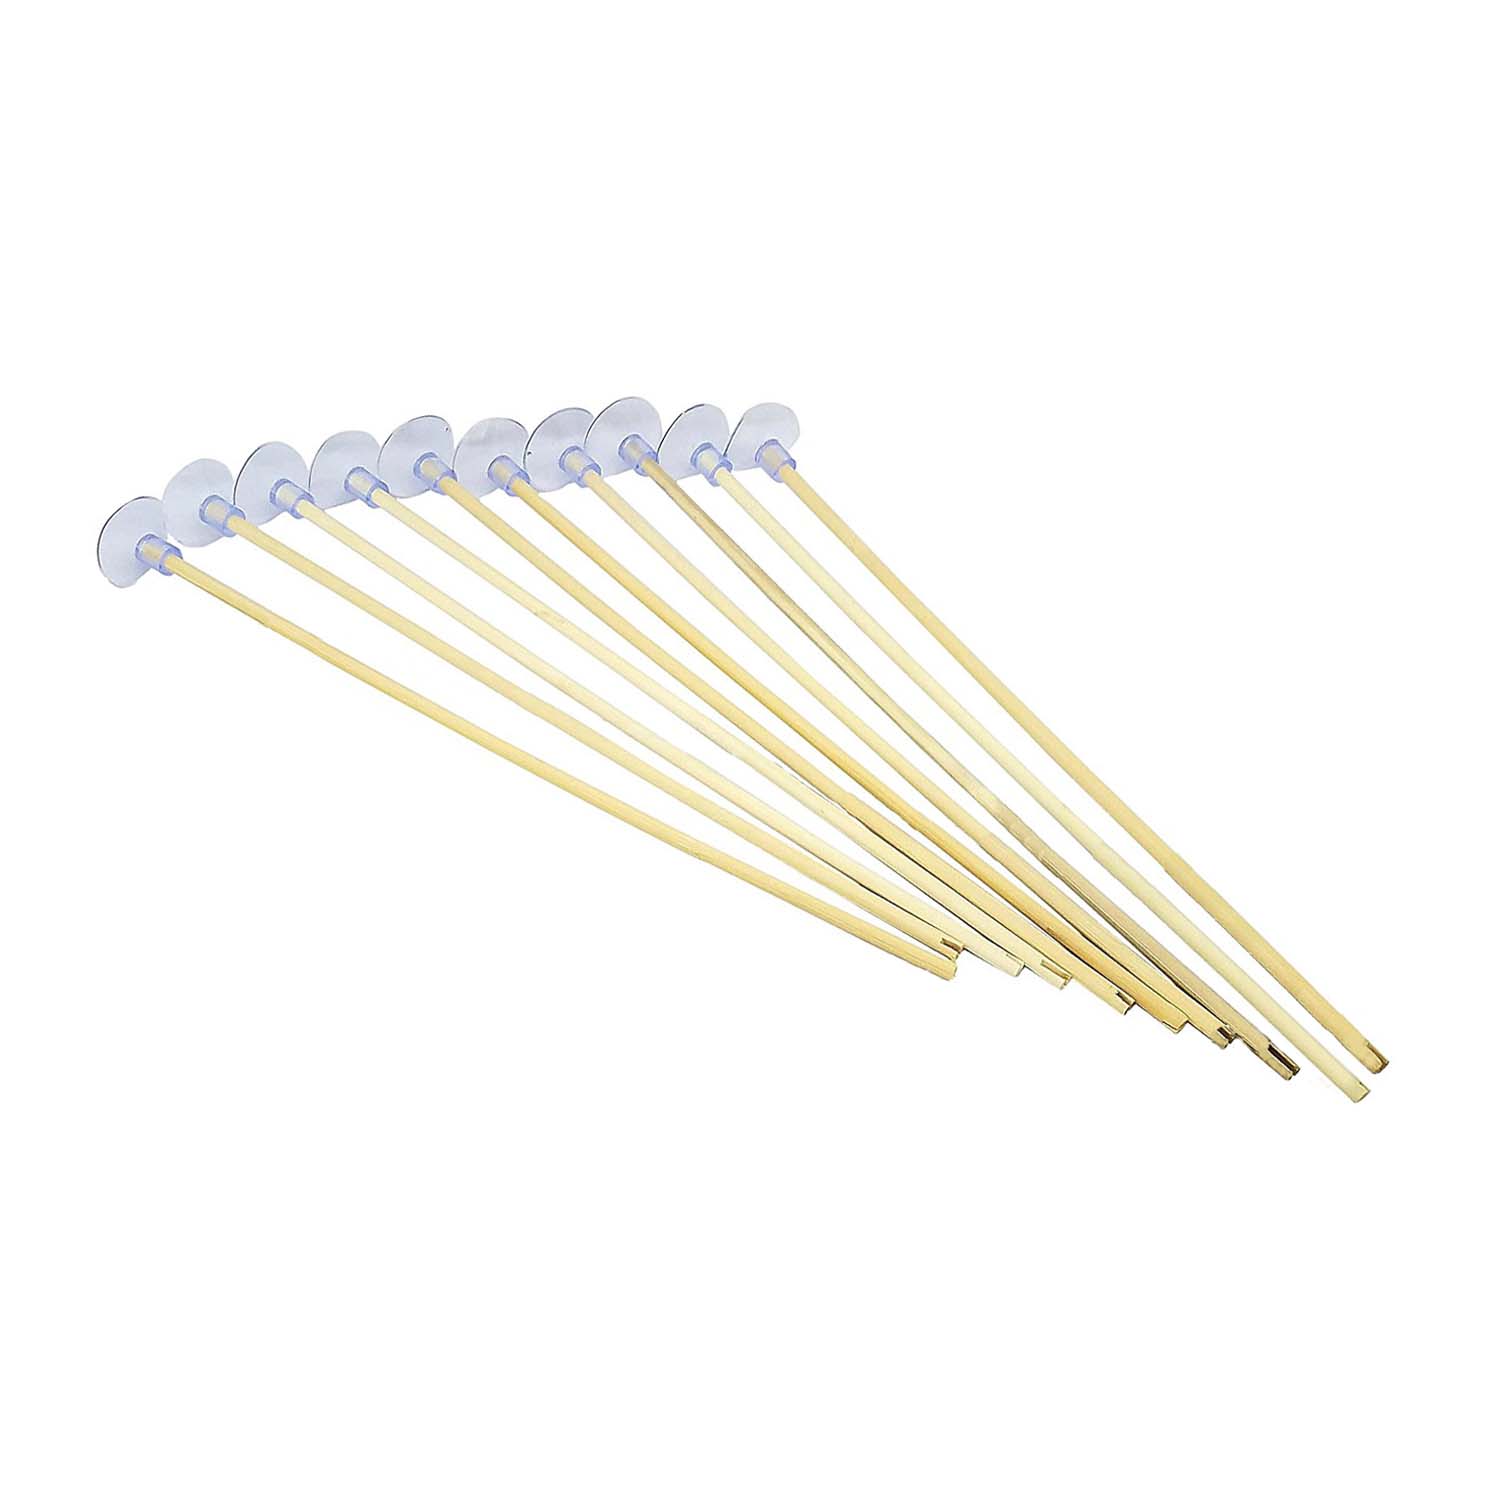 20 Spare Toy Arrows For Bows or Crossbow (Suction or Rubber Arrowheads)